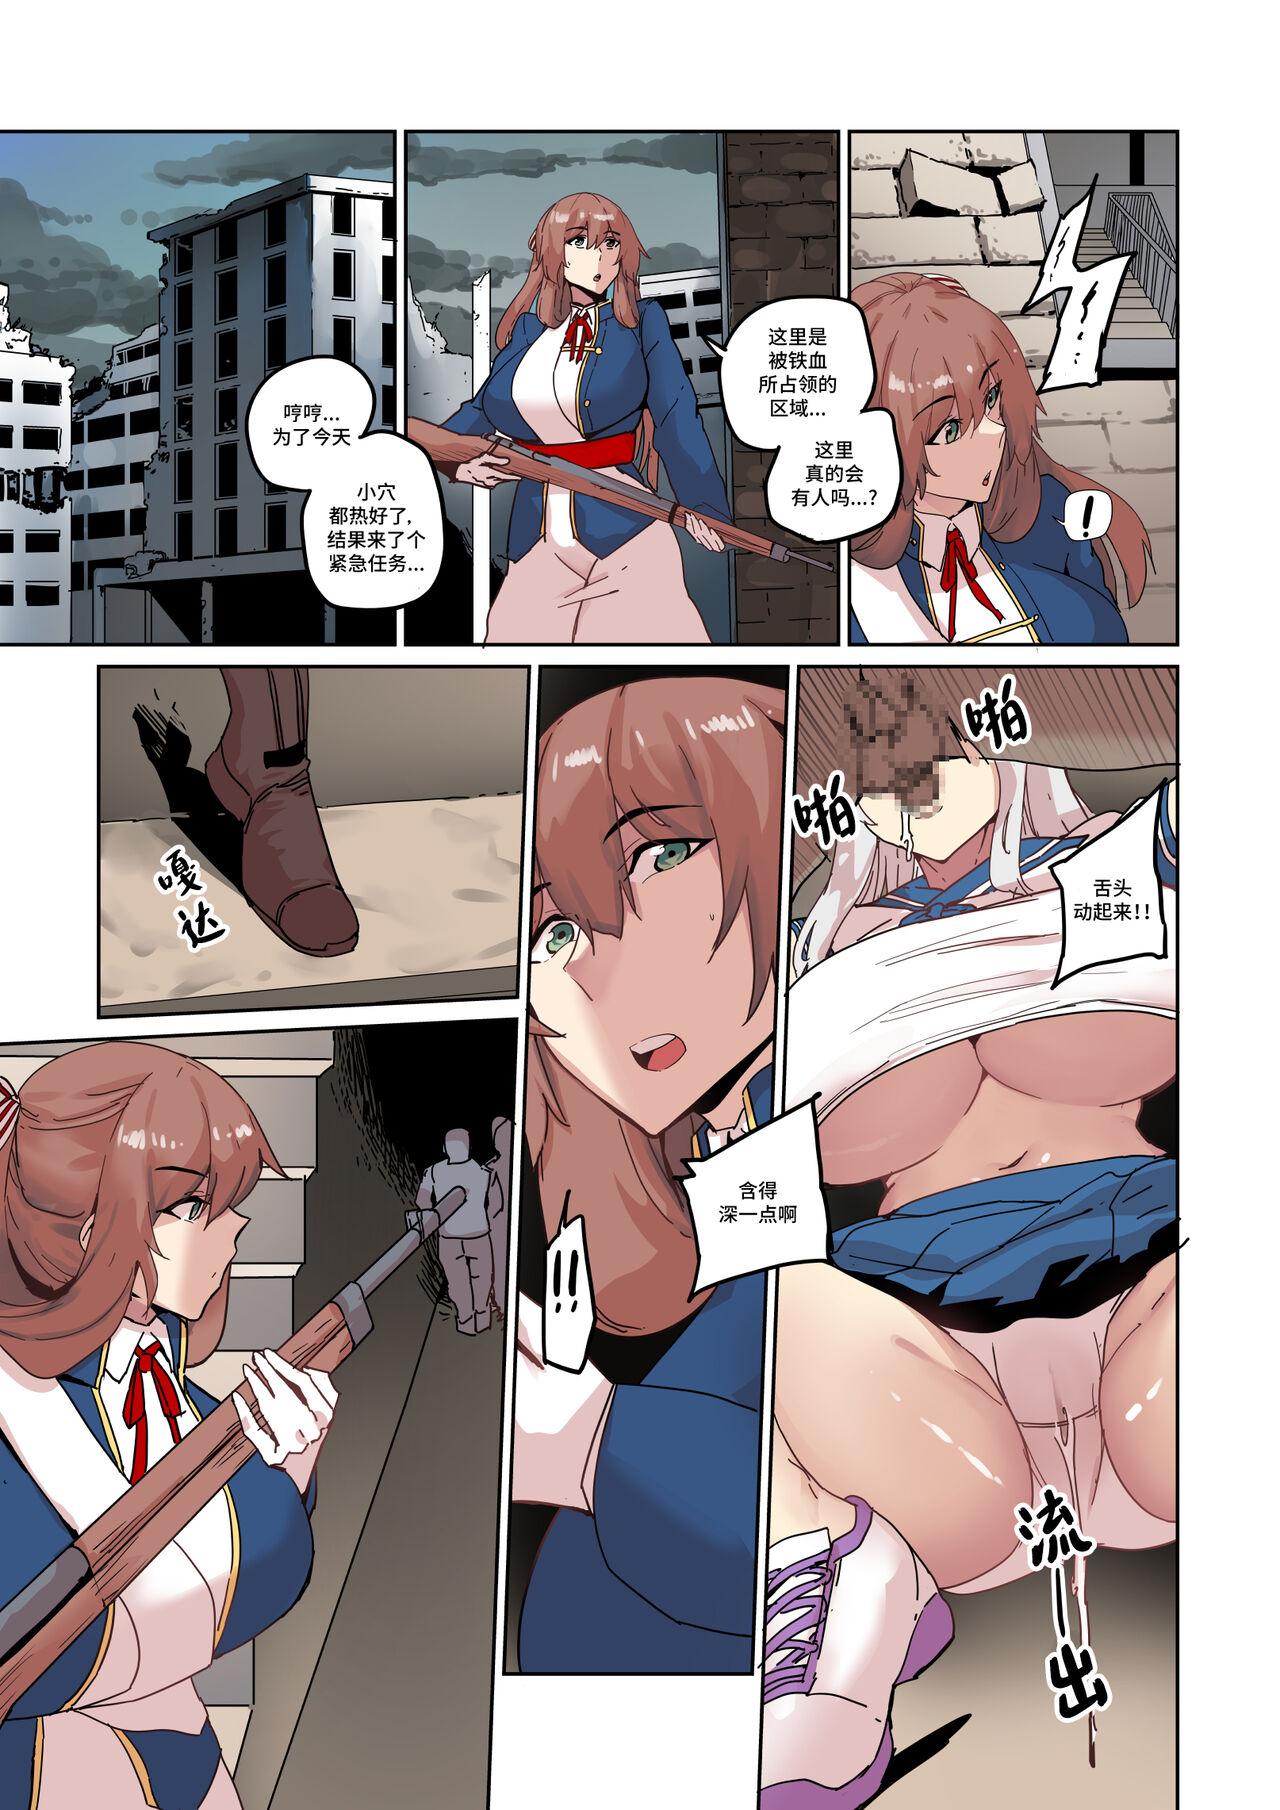 Magrinha Griffin Sponsor 3 - Girls frontline Gay Theresome - Page 8